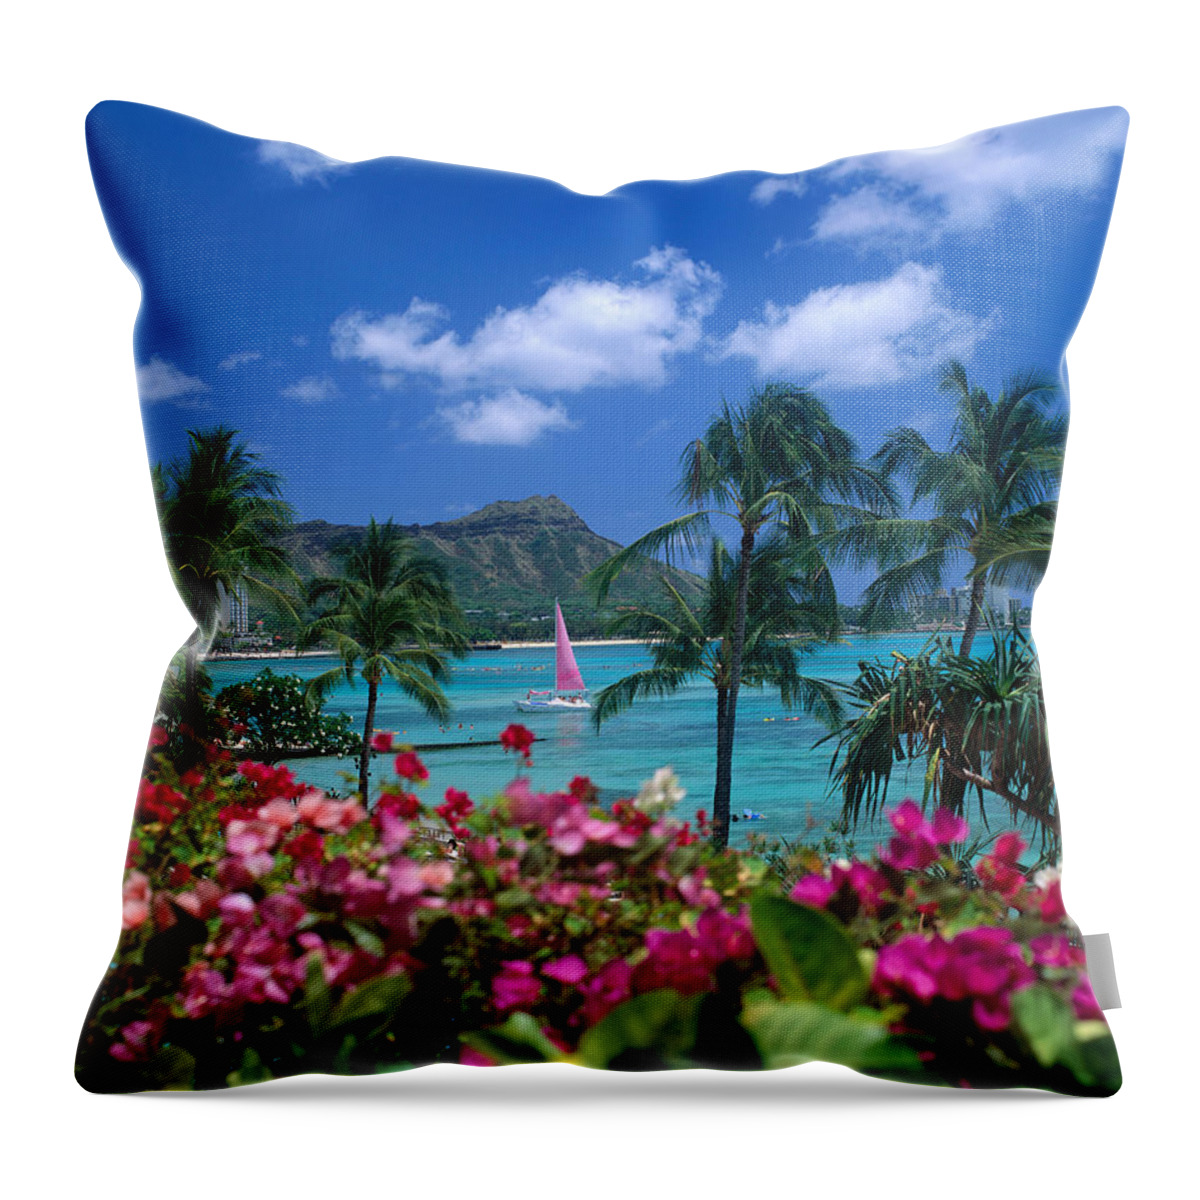 A42h Throw Pillow featuring the photograph Diamond Head Paradise by Tomas del Amo - Printscapes